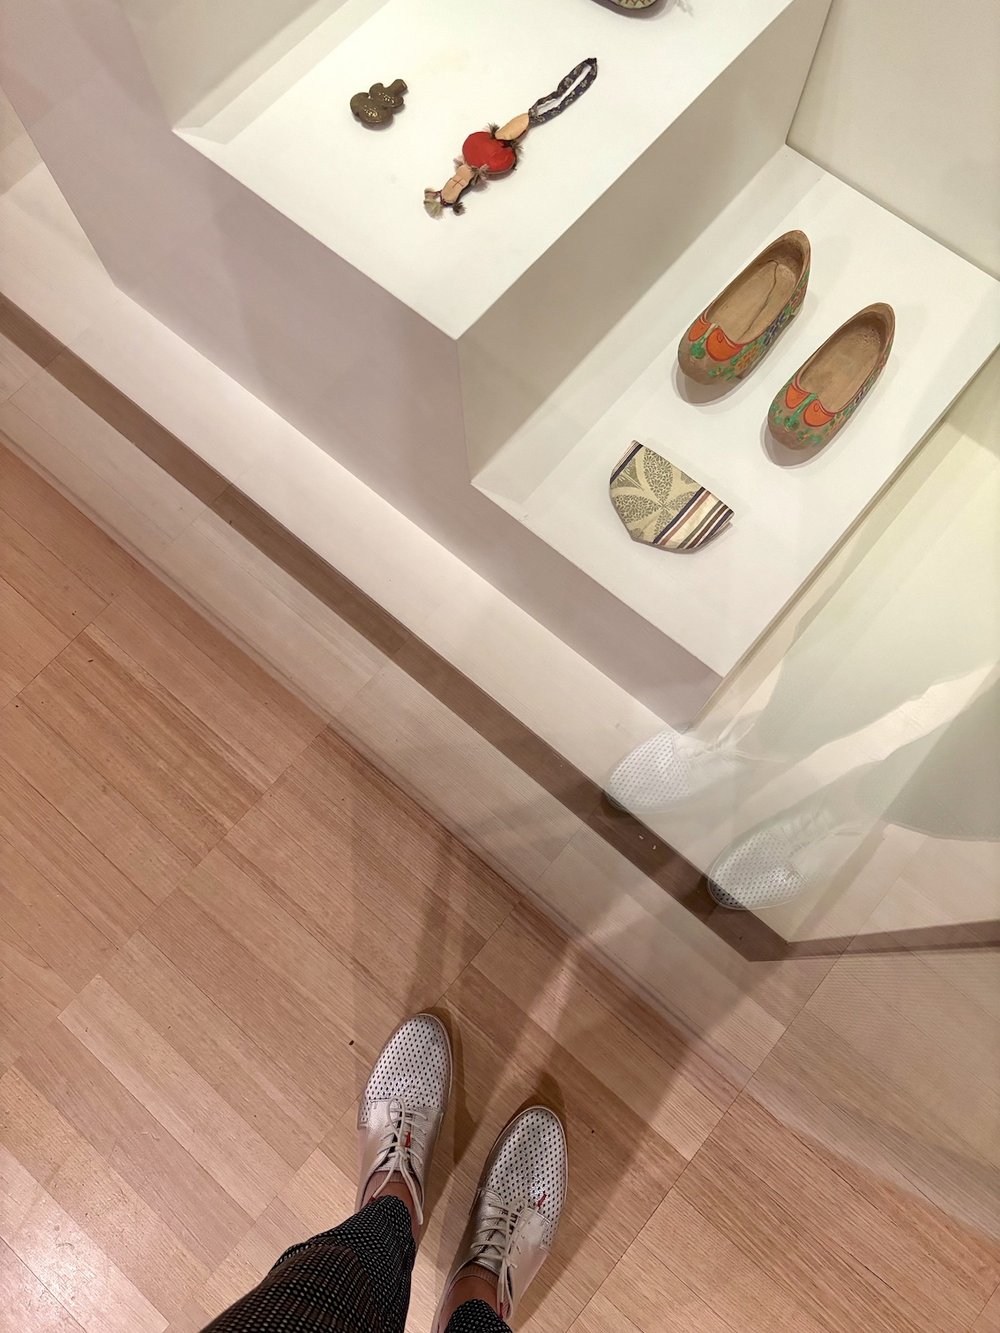 National Gallery of Victoria little shoes_low res.jpg